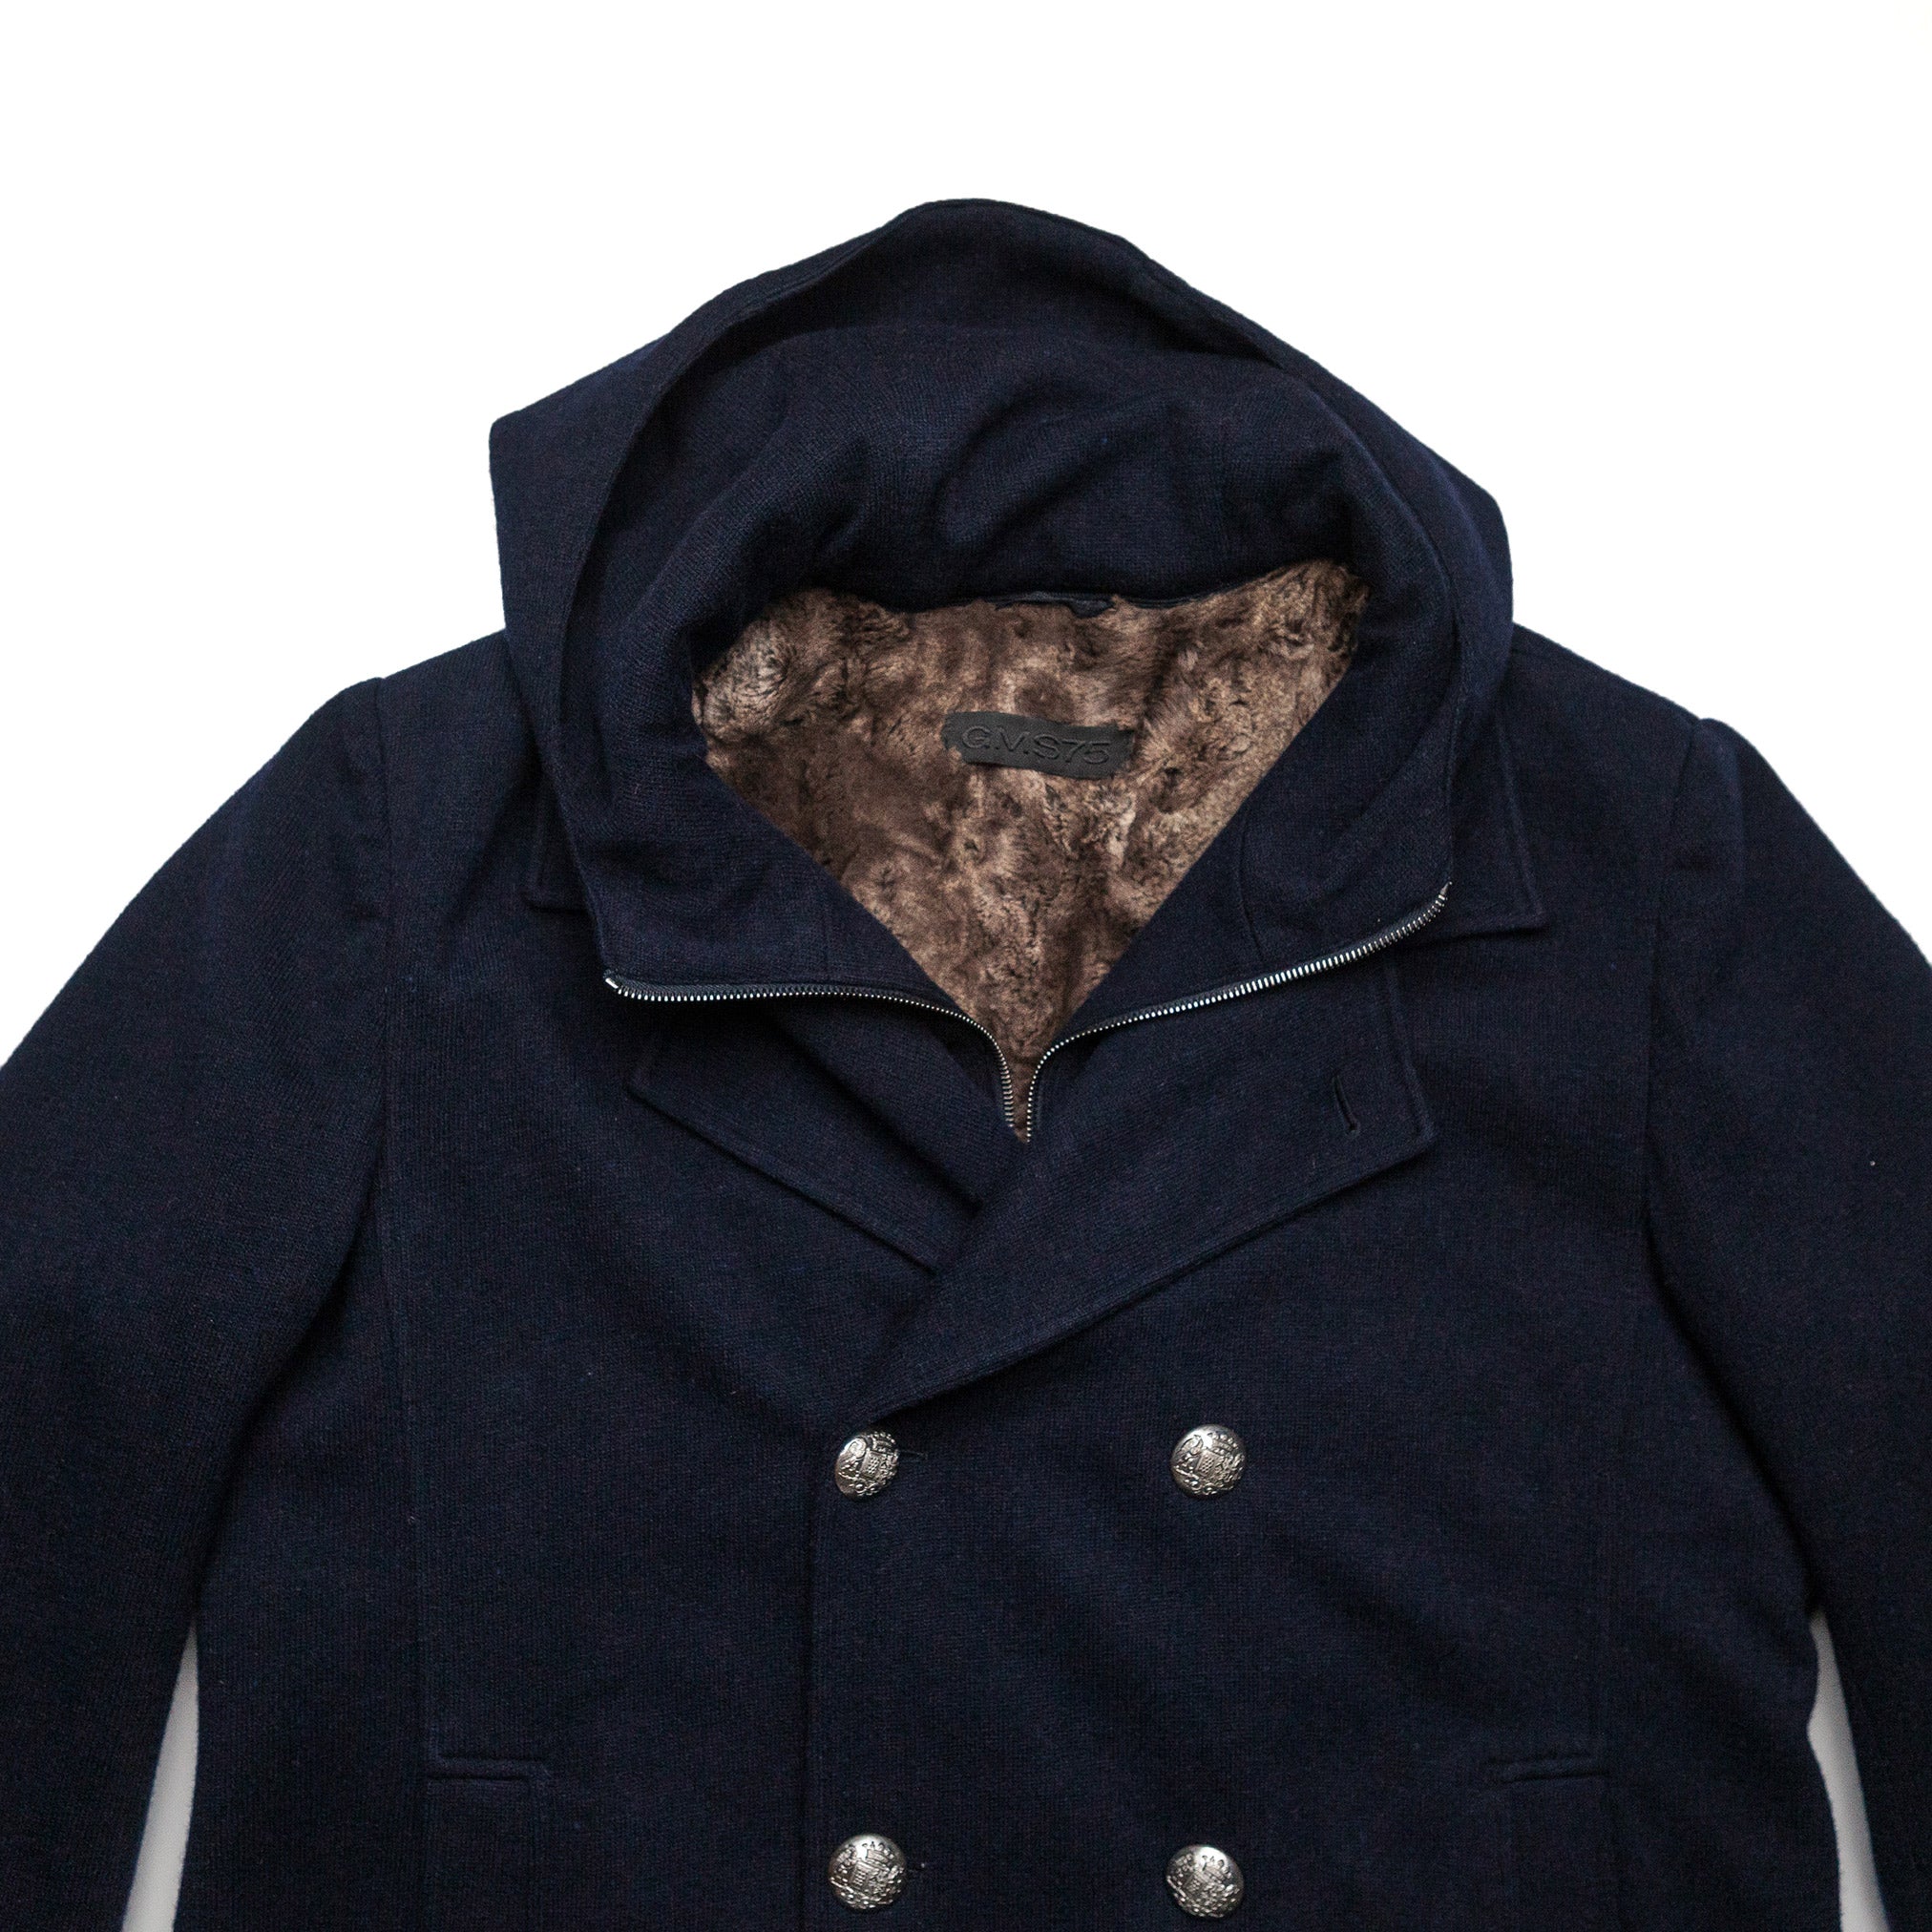 Lined Peacoat with Hood in Navy